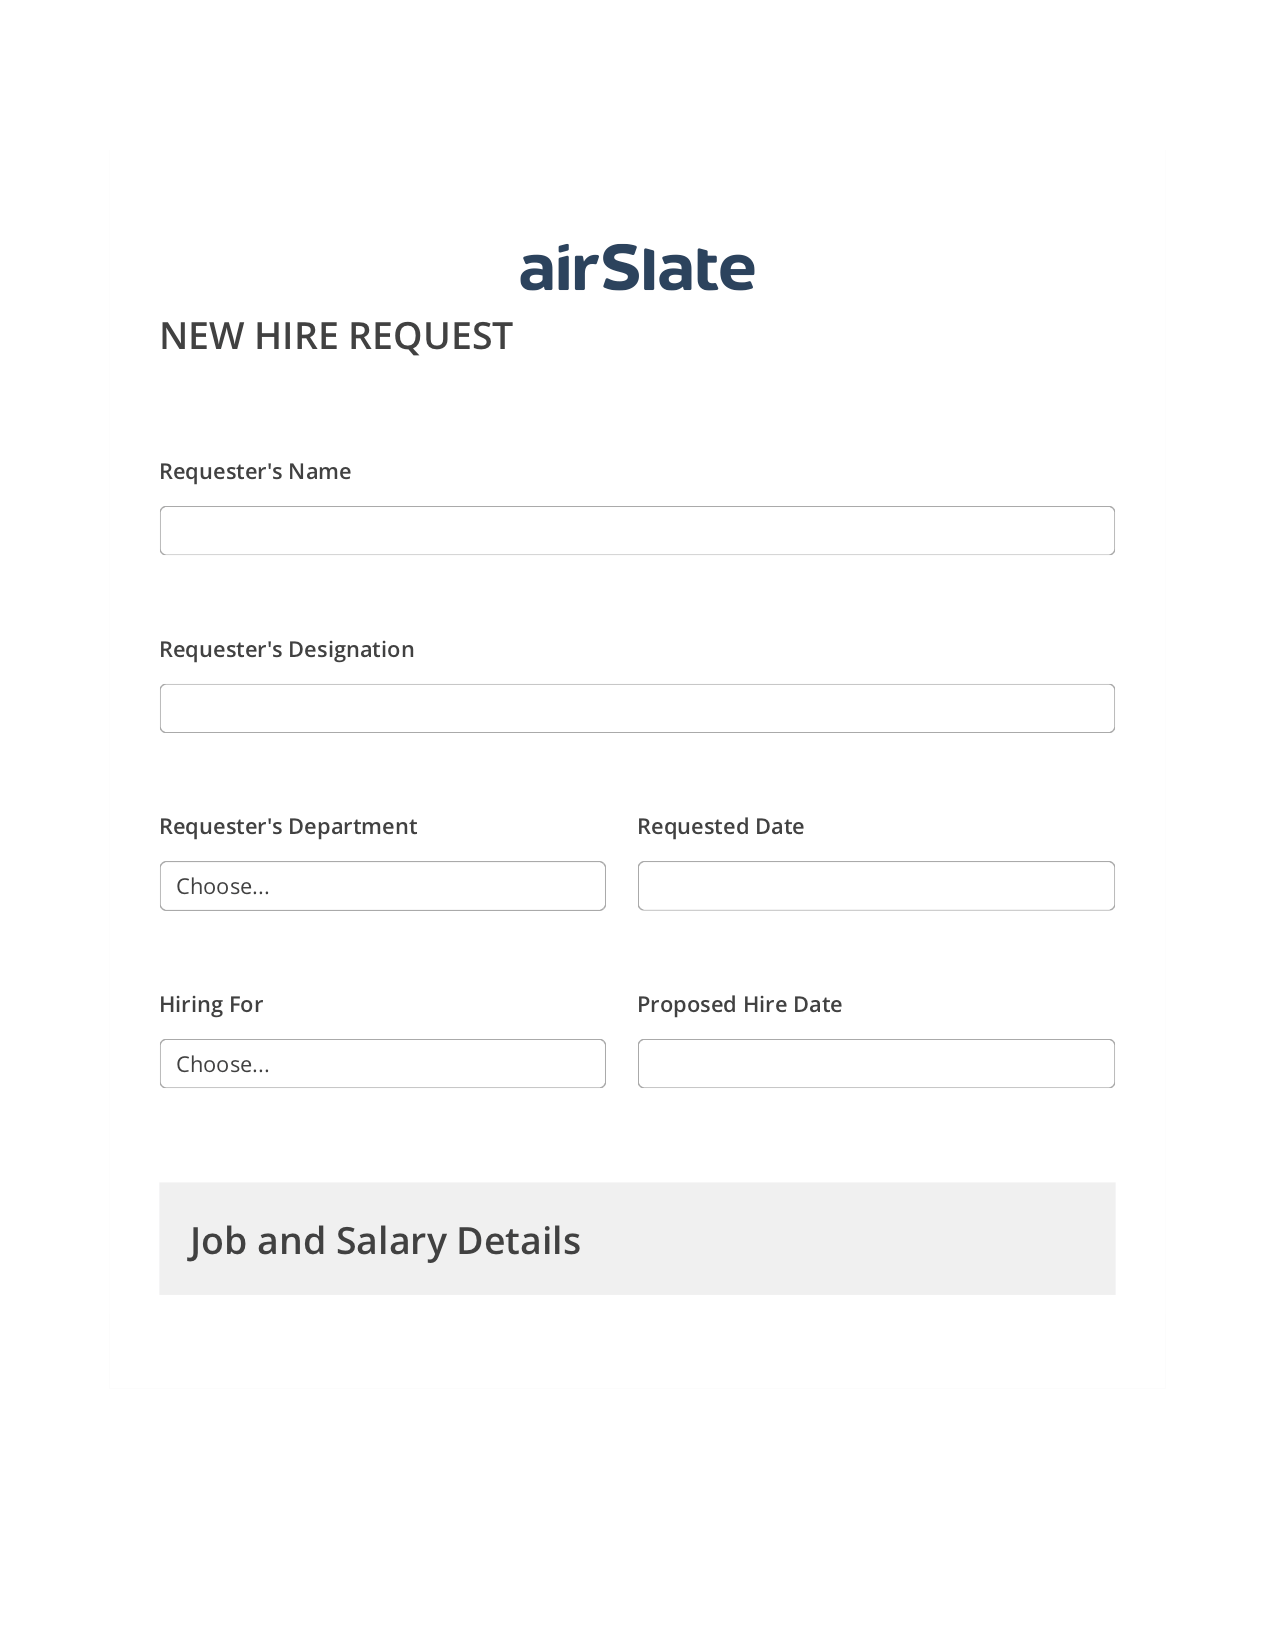 Multirole Hiring Request Workflow Pre-fill from Google Sheets Bot, Create slate addon, Export to Salesforce Record Bot